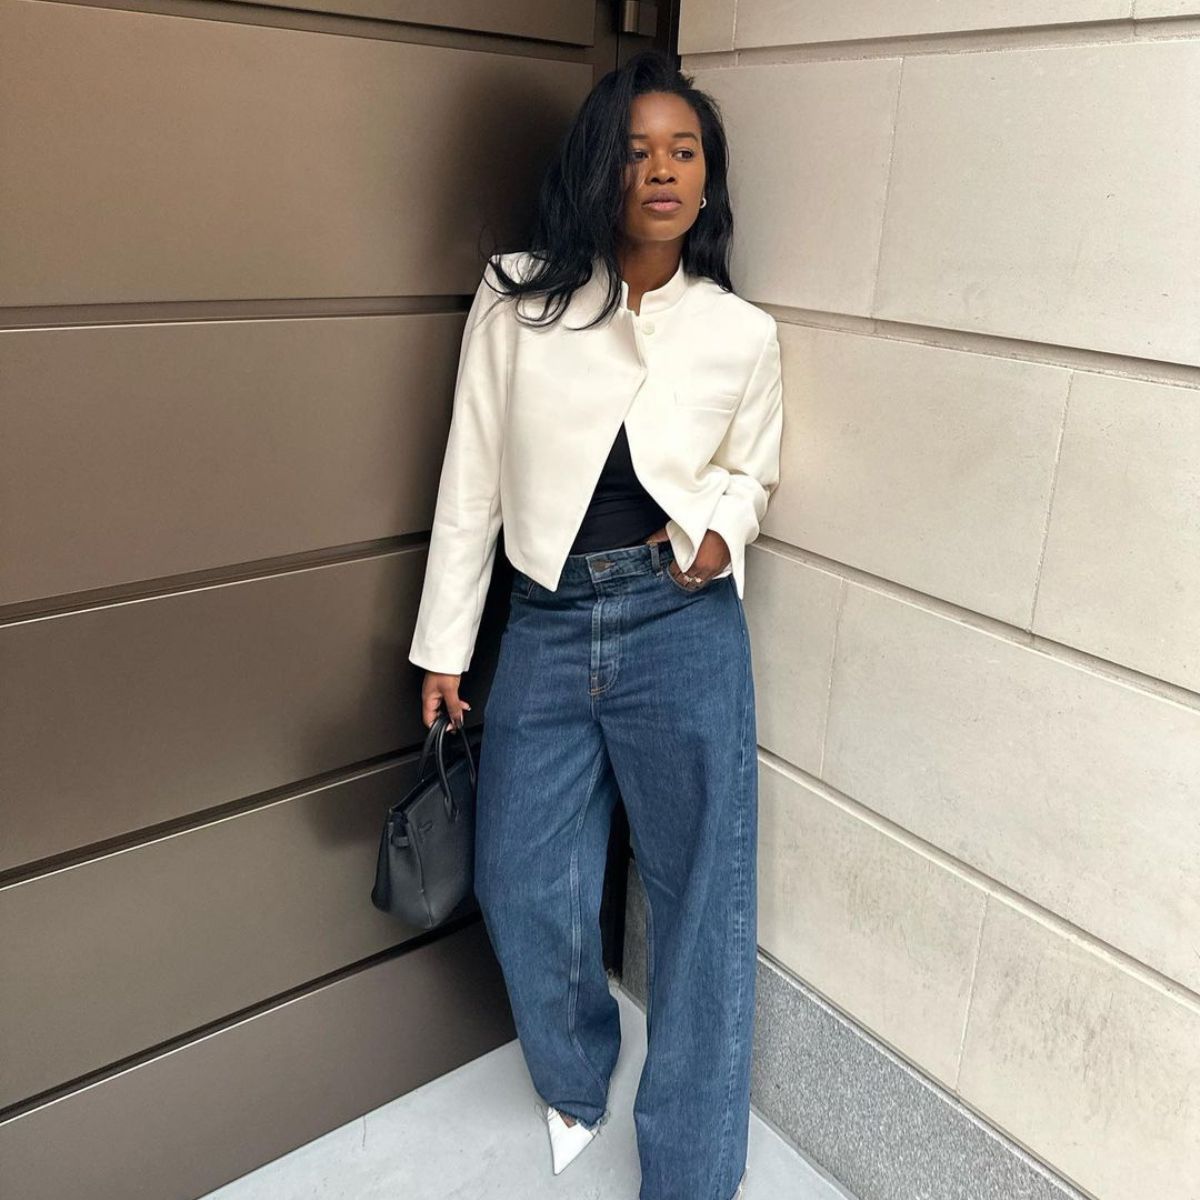 How to Wear a Wide Leg Jeans Outfit - Venti Fashion